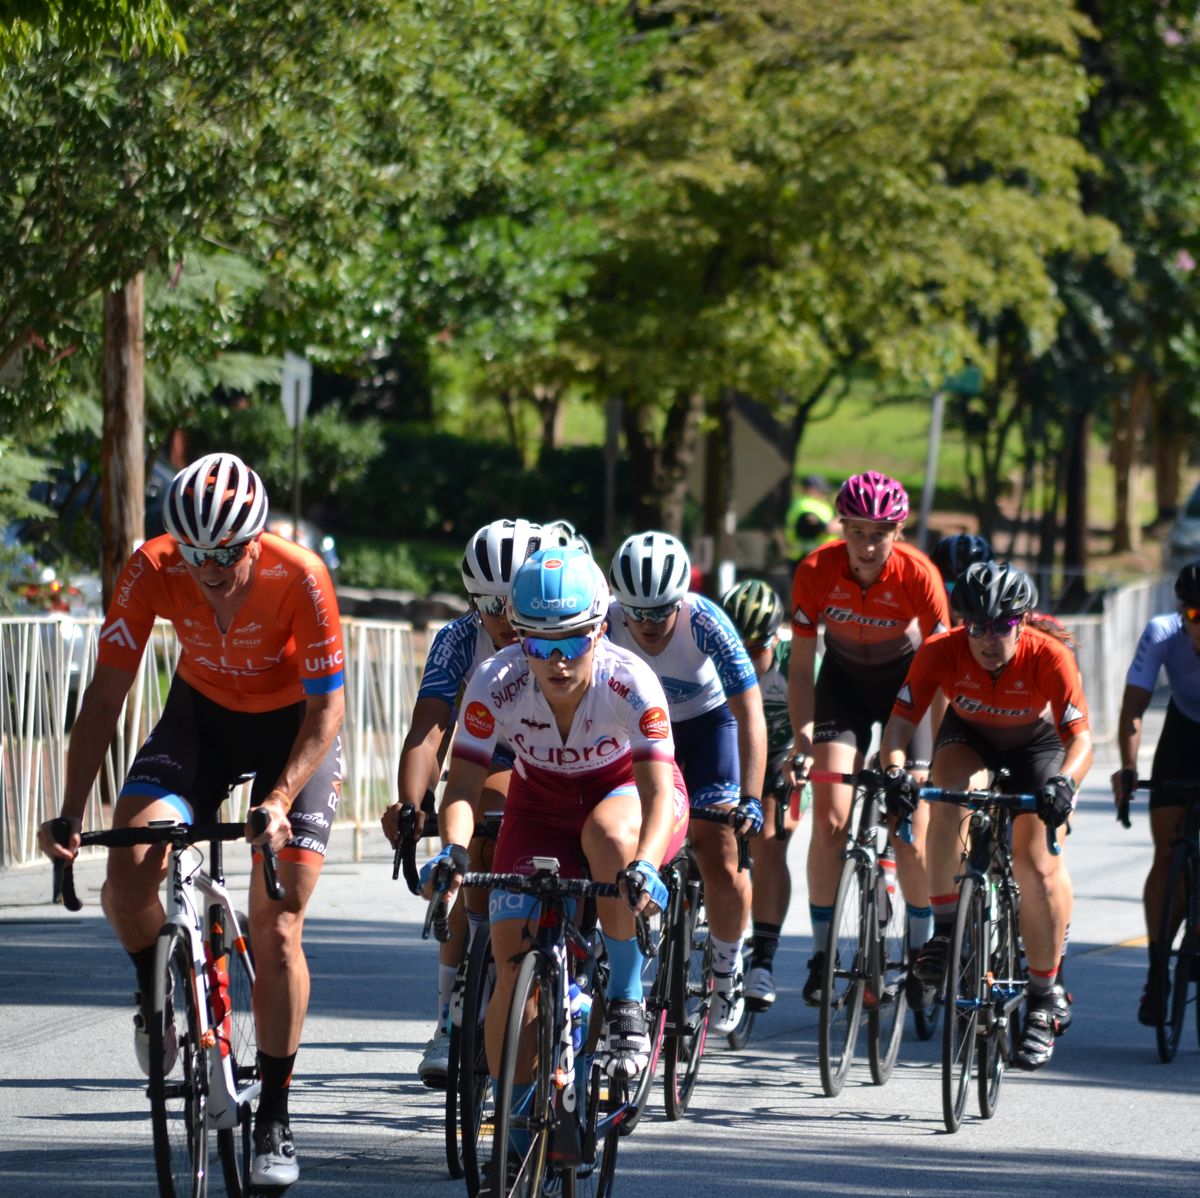 grant park criterium offering $20,000 in prizes for pro women's race